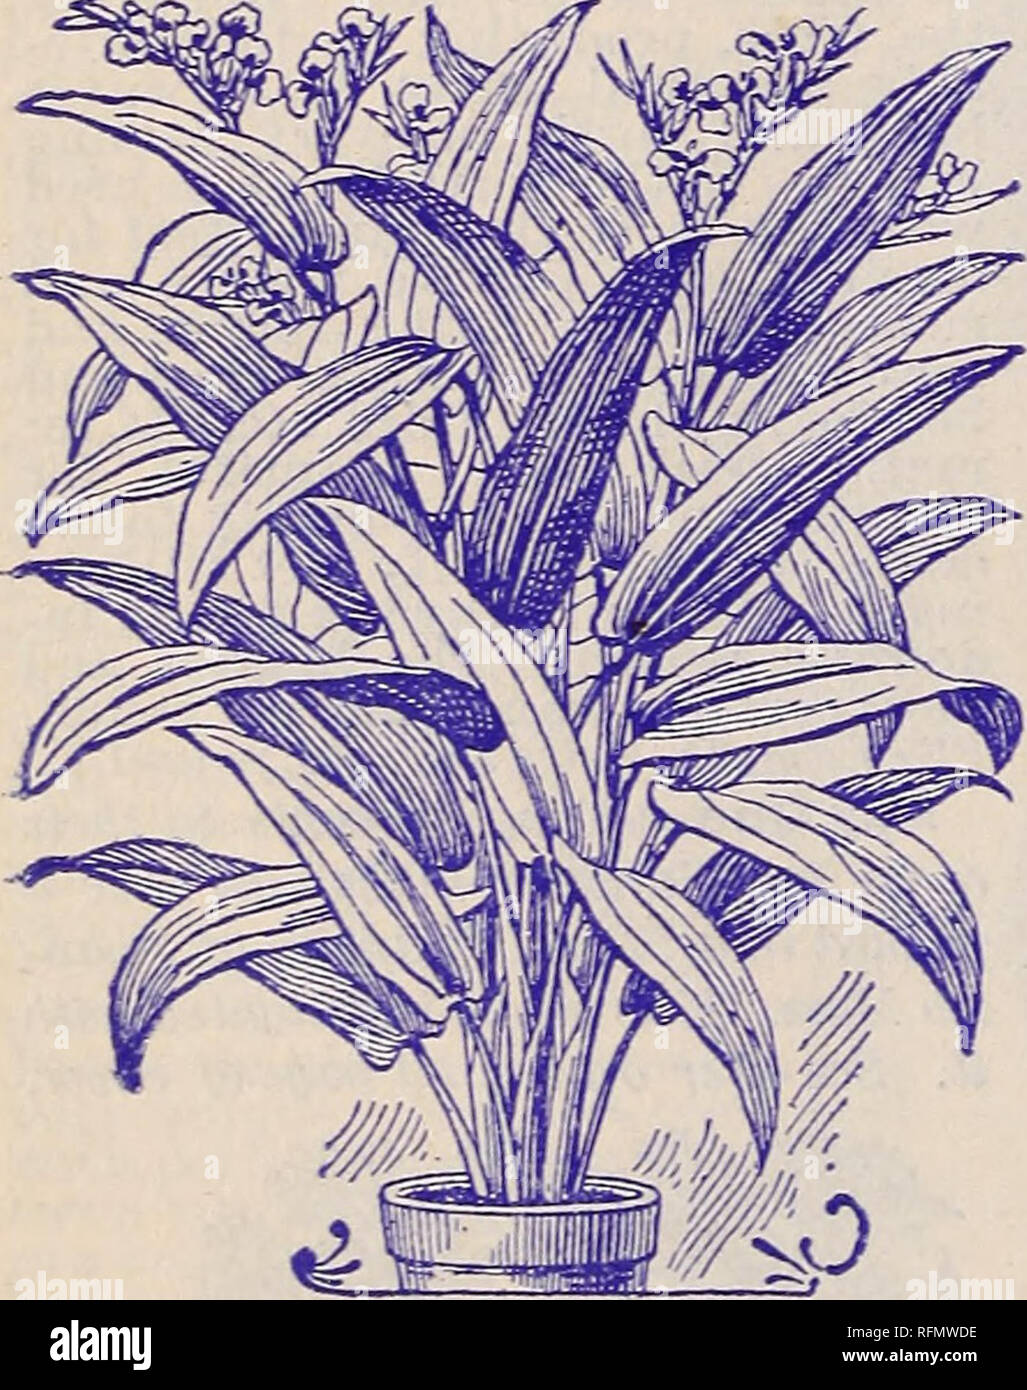 . Rare Florida flowers and fruits. Nurseries (Horticulture) Florida Catalogs; Flowers Catalogs; Plants, Ornamental Catalogs; Shrubs Catalogs. Pain} Grass. (Panicum Ereurrcns.) A very elegant grass from Natal, which makes an exceed- ingly fine decorative pot plant. Fesv would think it a grass, for it much more closely resembles the seed leaves of soma Palms, partic- ularly the Cocos. It also striking- ly resembles Cureidigo recurvata, which is so much used for decor- ative purposes, but is much hand- somer, more easily and quickly grown. Each leaf is a foot or more in length, two to three or fo Stock Photo